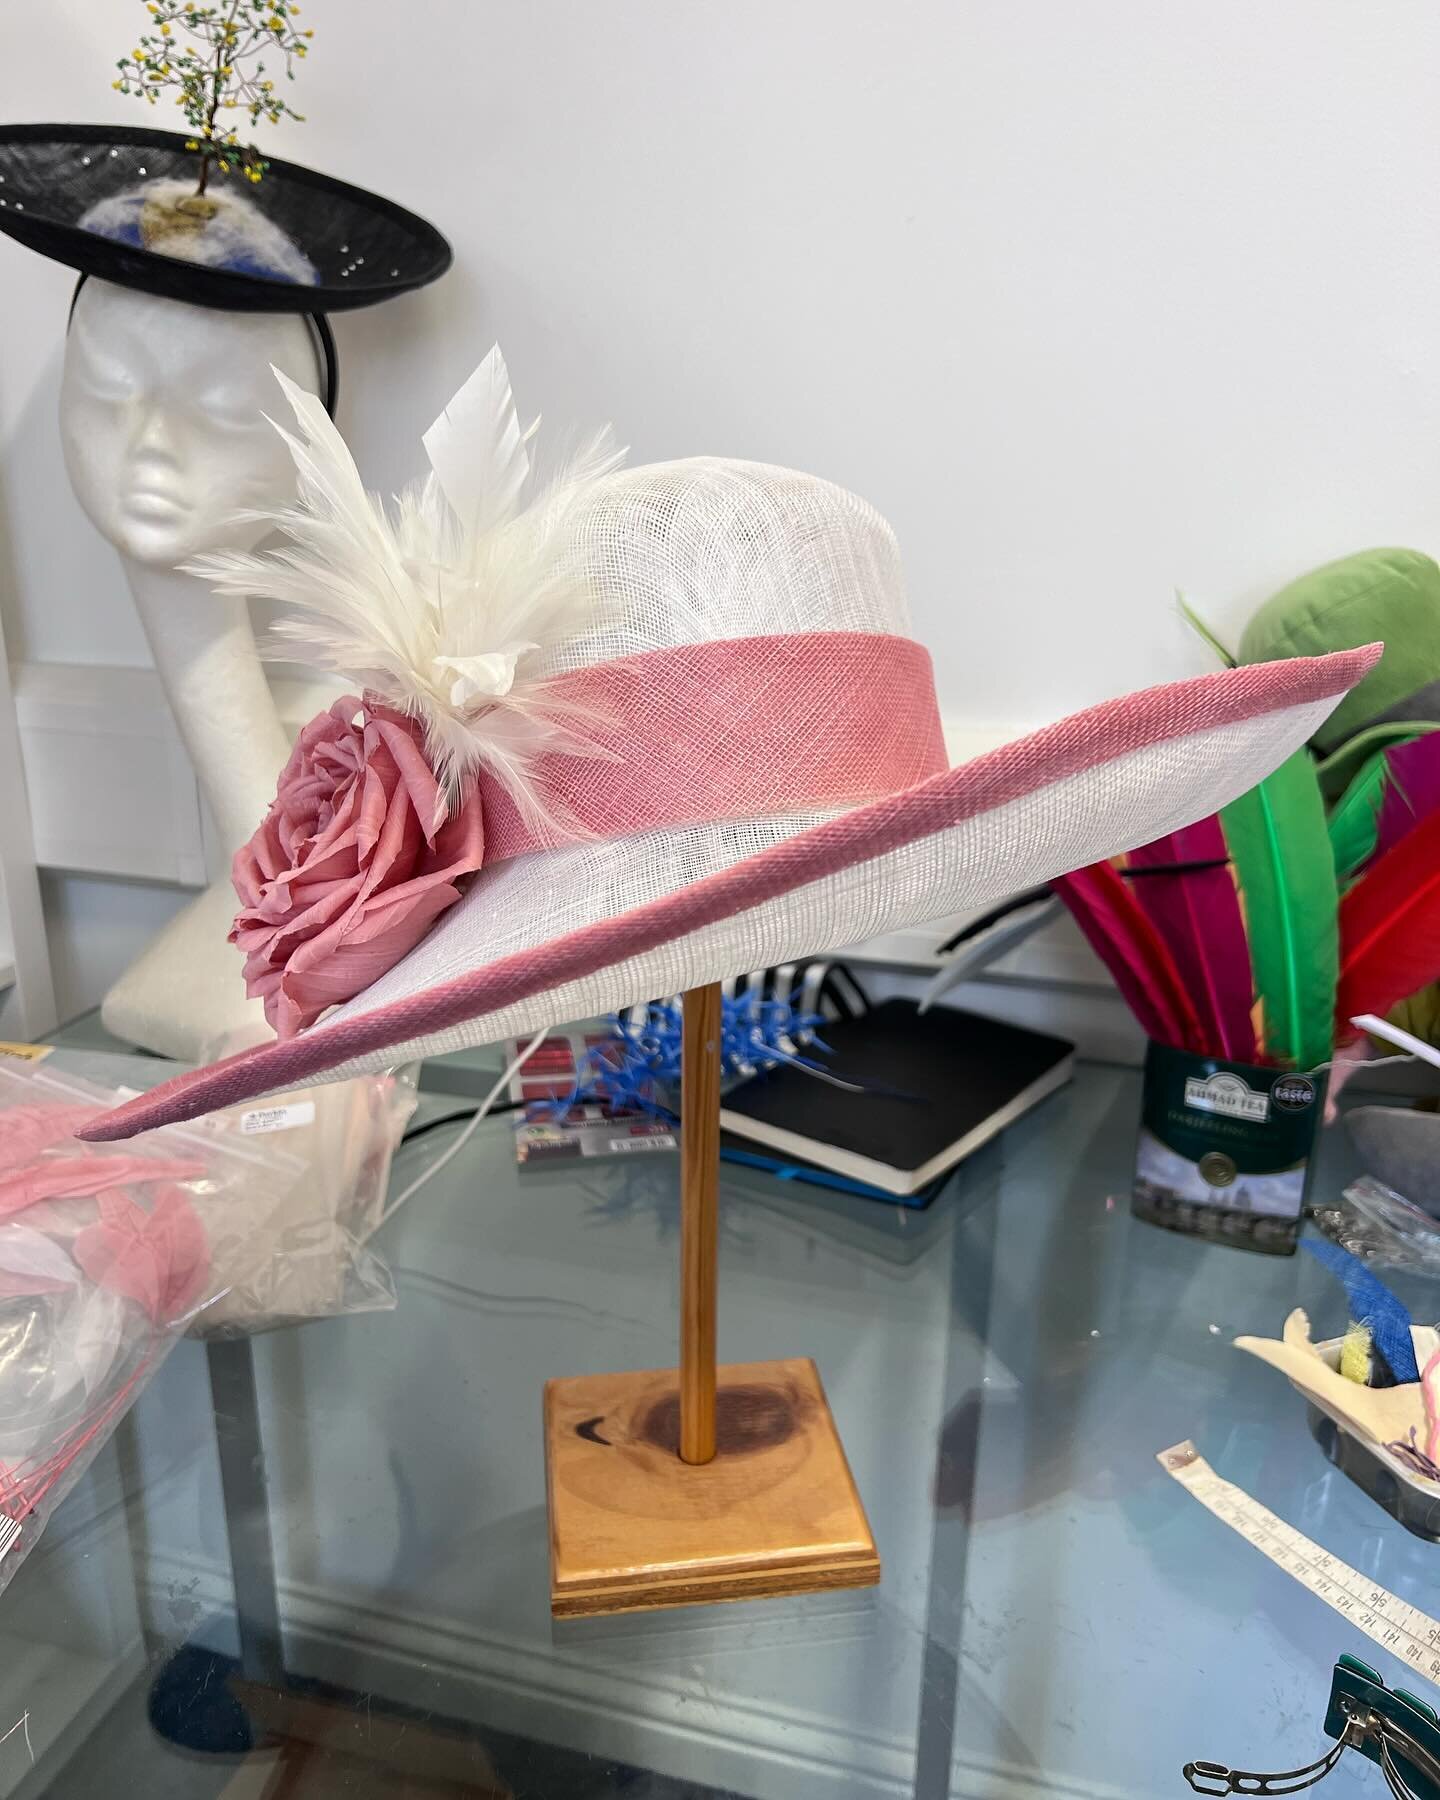 Happy Easter 🐣 from me and my bonnet (that I really must get round to photographing properly!) while this hat would have looked lovely strolling down The Avenue in the Easter Parade (sonnet writing optional) she&rsquo;d also look lovely at a wedding